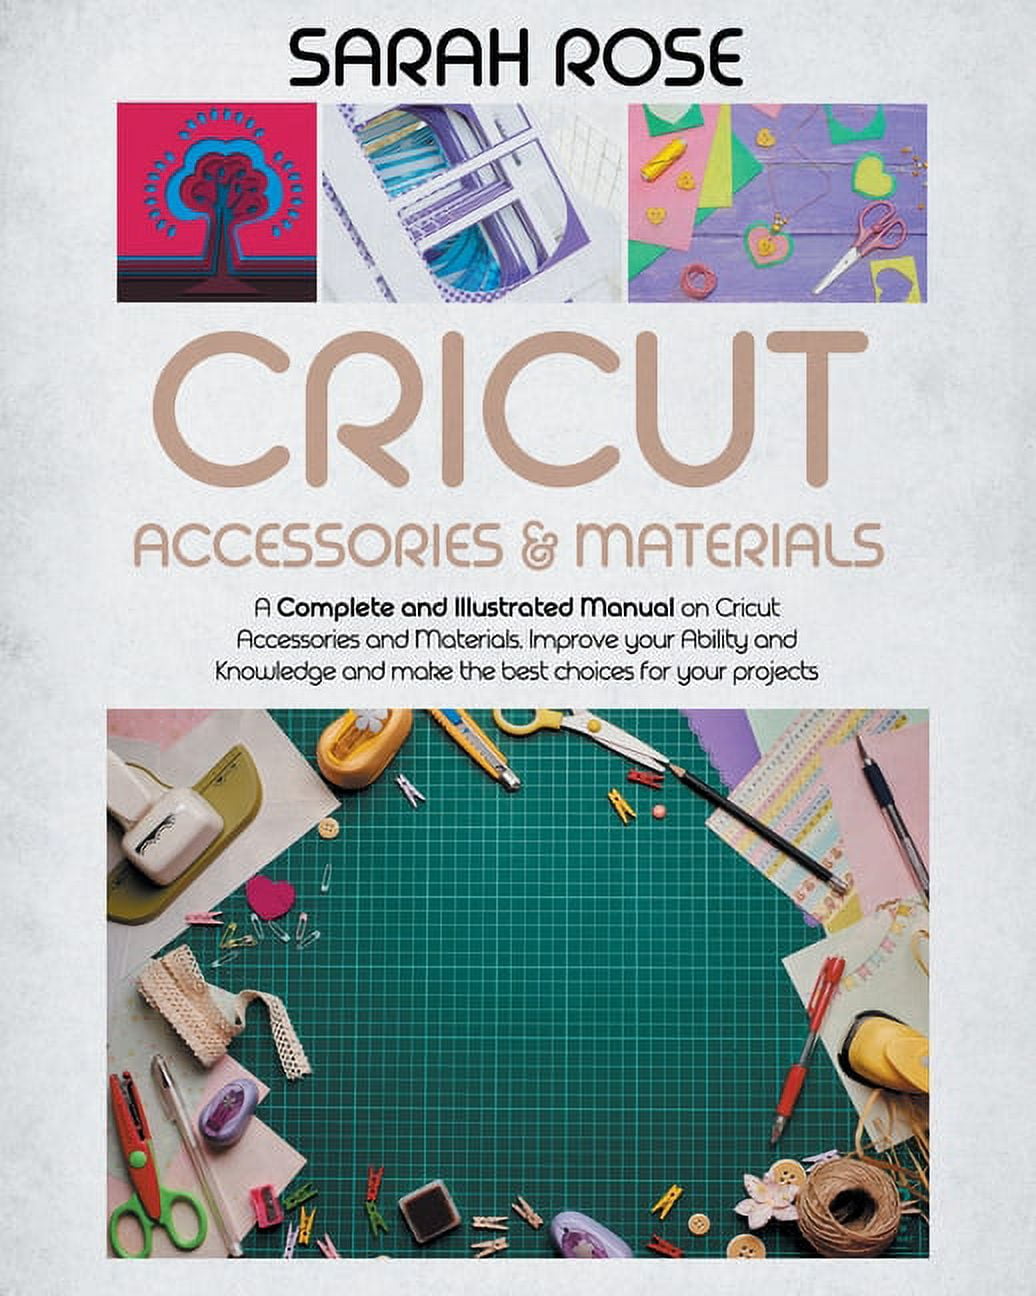 Cricut Accessories and Materials : A Complete and Illustrated Manual on Cricut Accessories and Materials. Improve Your Ability and Knowledge and Make